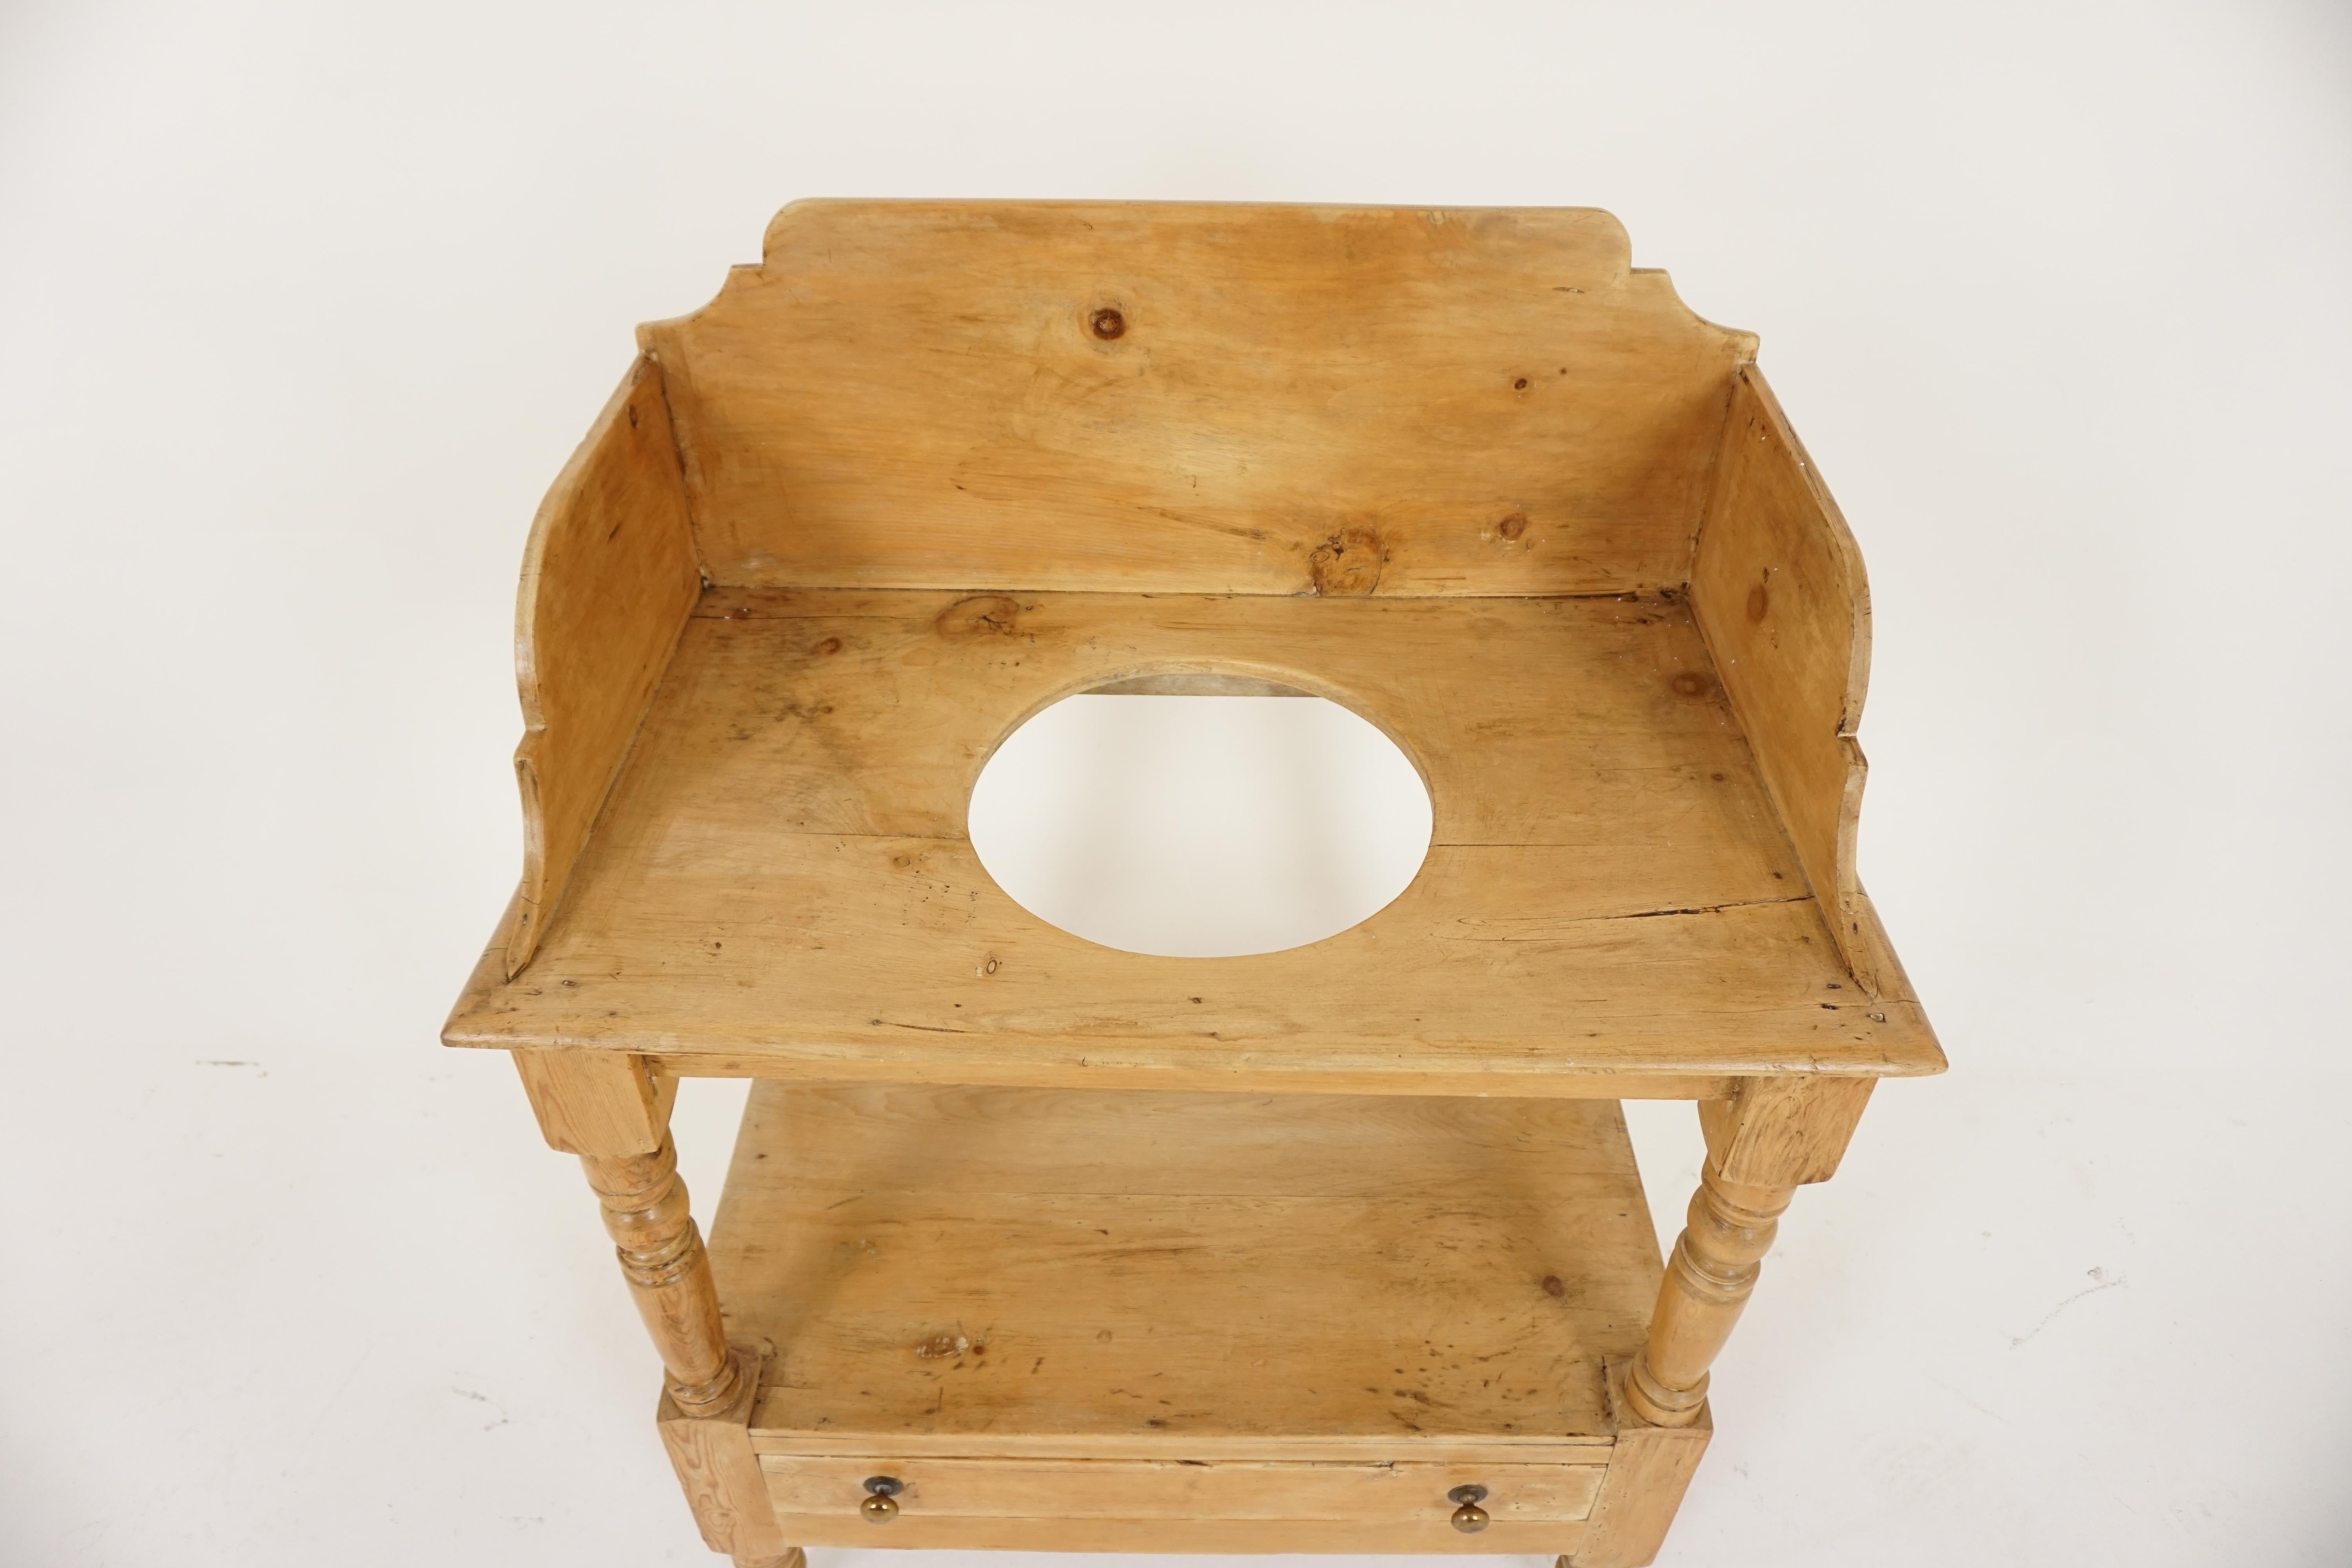 Antique Victorian pine washstand, table, Scotland 1880, B2063

Scotland, 1880
Solid pine construction
Wax finish
High splash-back gallery
Shaped back and sides
Moulded edge to the top
Below is a shelf with a long dovetailed drawer
Original